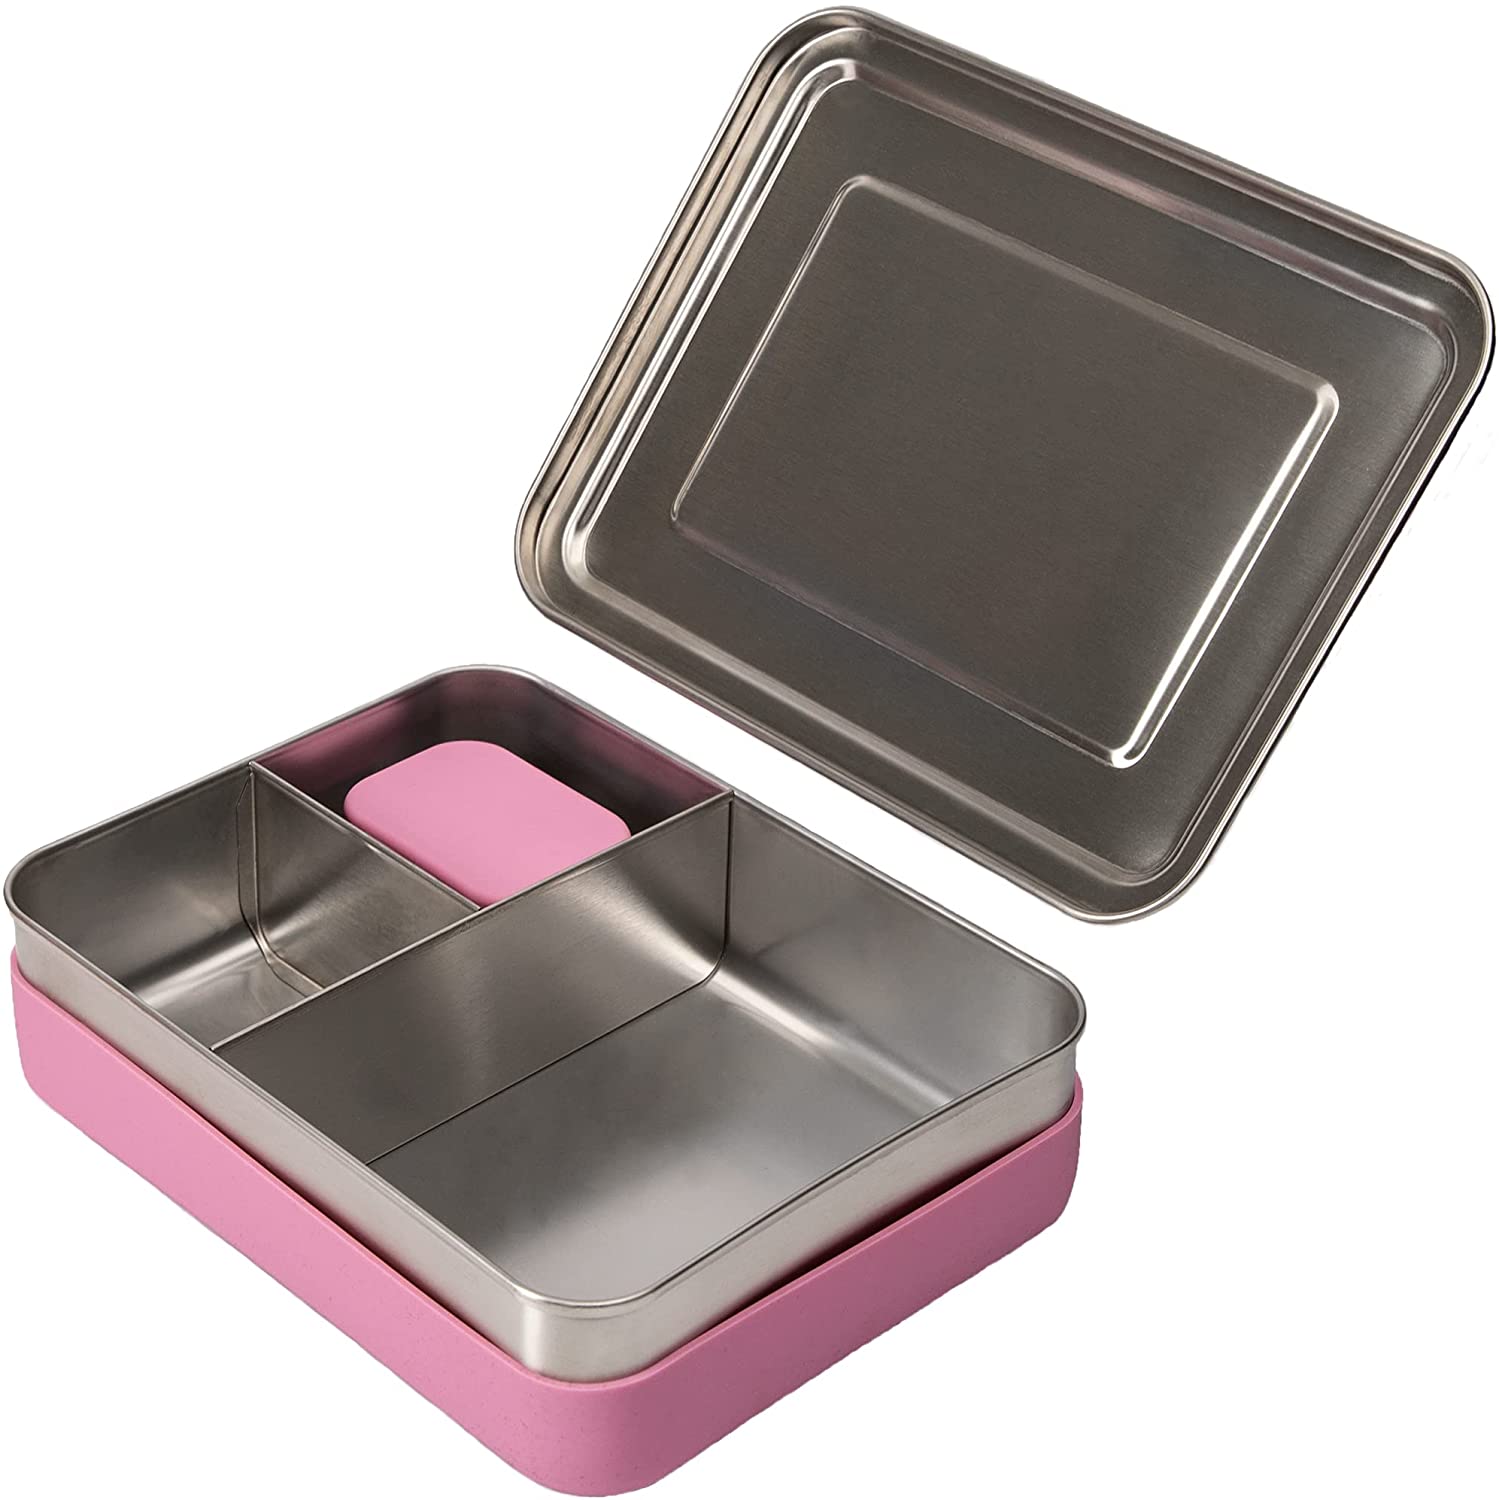 Bento Tek 41 oz Pink and White Buddha Box All-in-One Lunch Box - with  Utensils, Sauce Cup - 7 1/4 x 4 1/4 x 4 - 1 count box